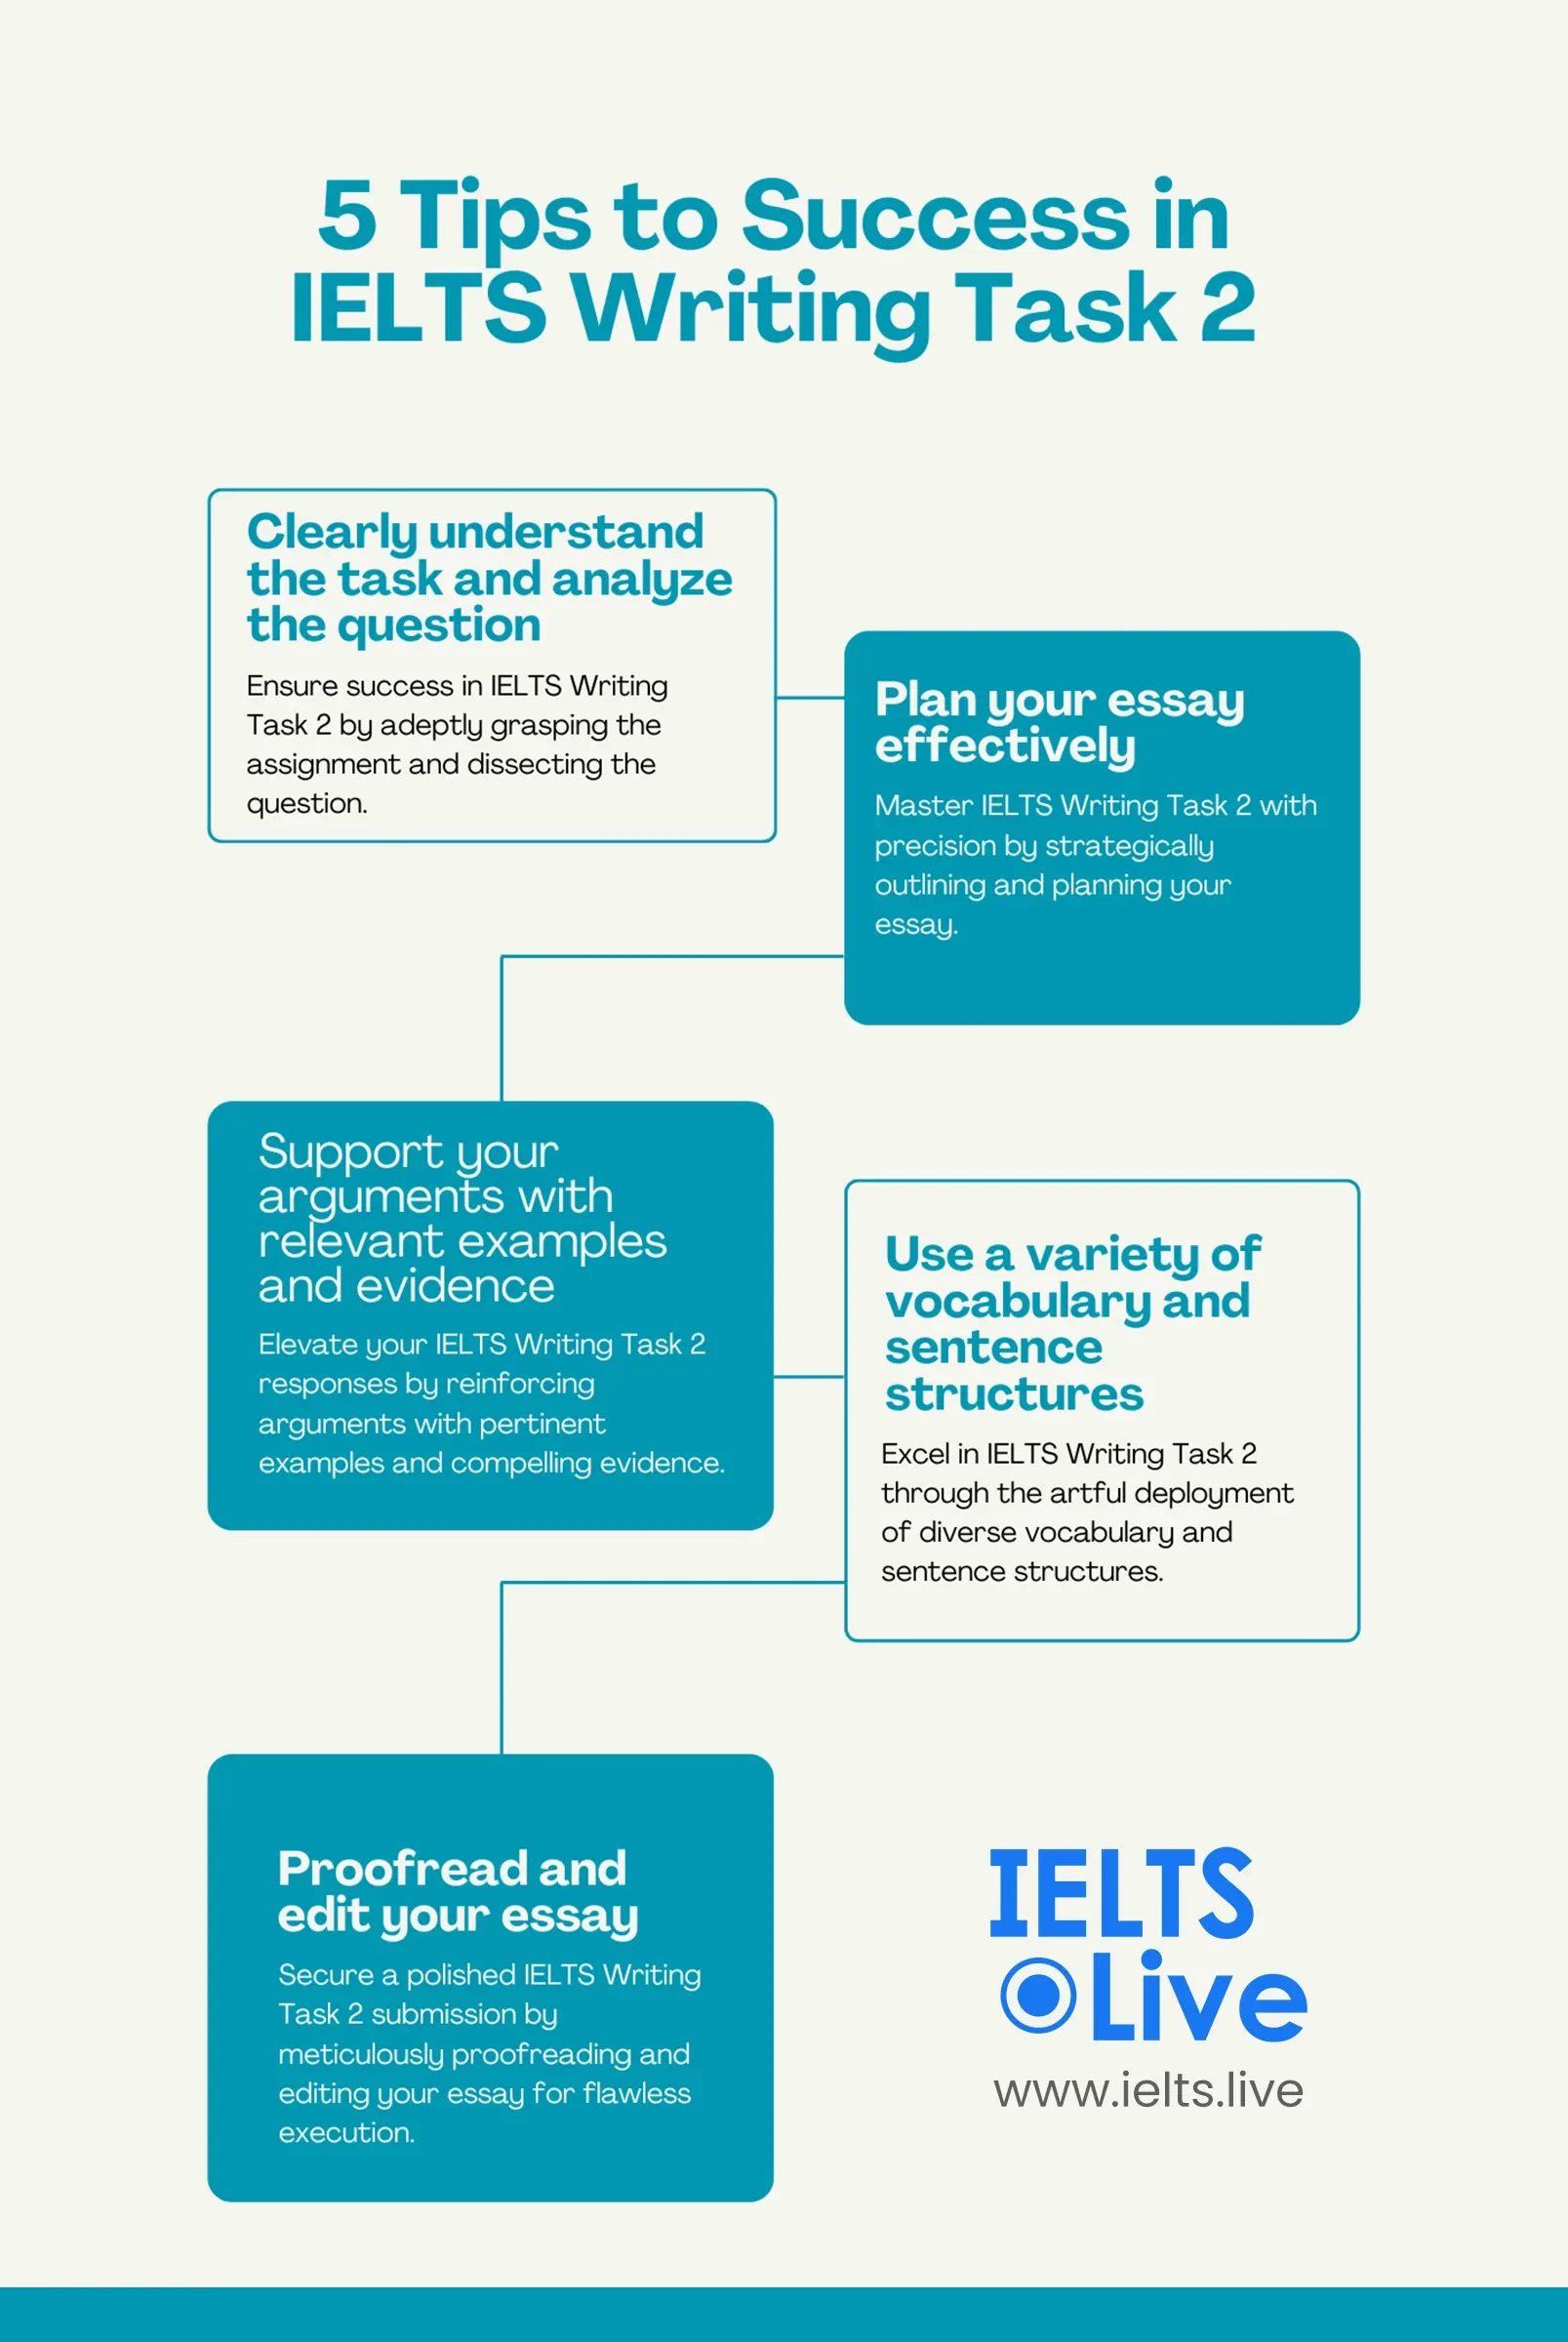 5 Tips to Success in IELTS Writing Task 2